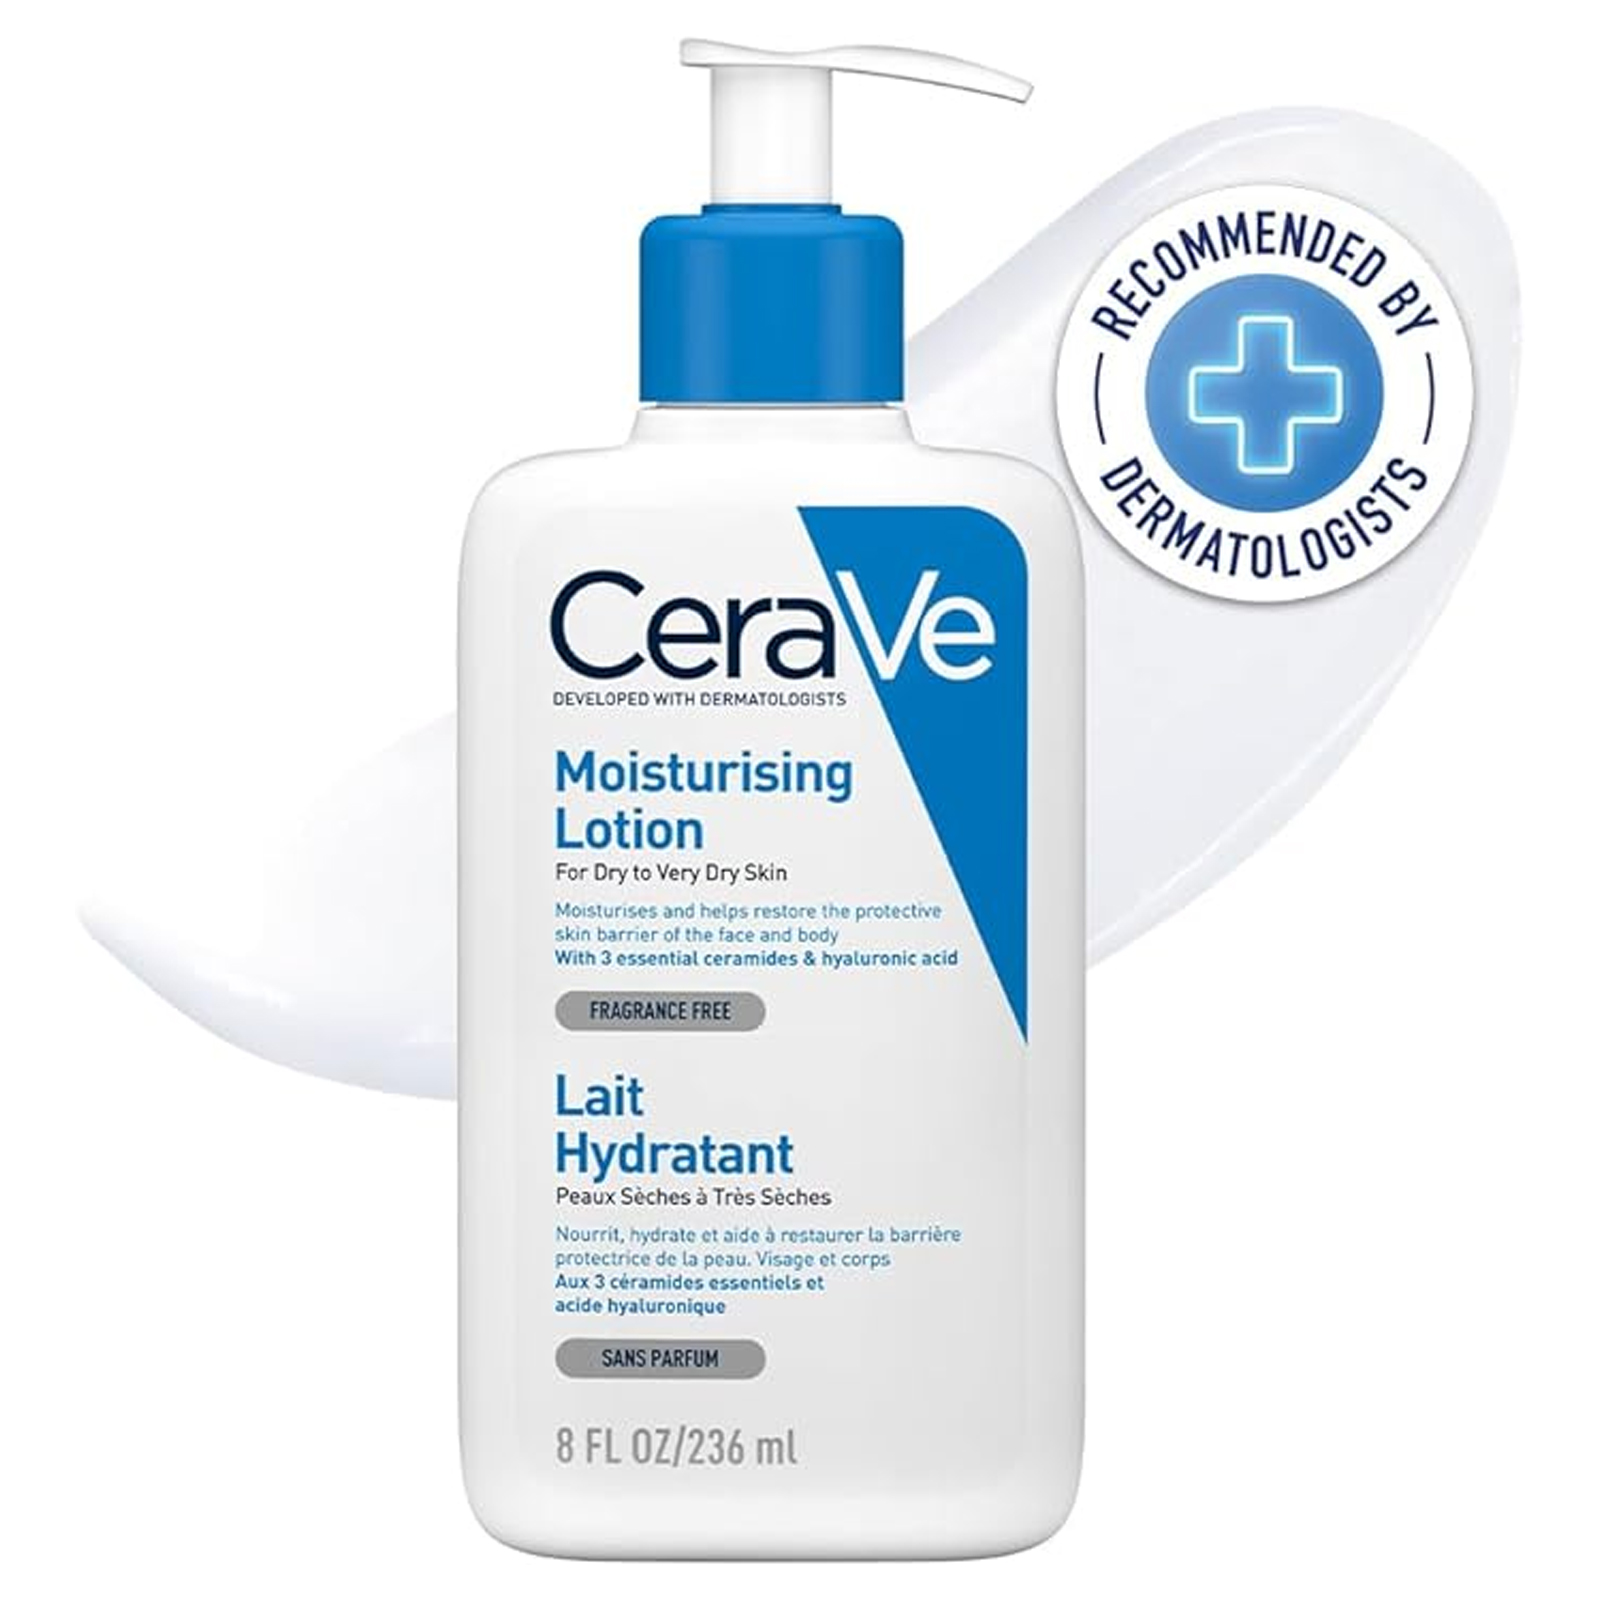 BODY LOTION MOISTURISING FOR DRY TO VERY DRY SKIN FRAGRANCE FREE CERAVE ( 236 ML )